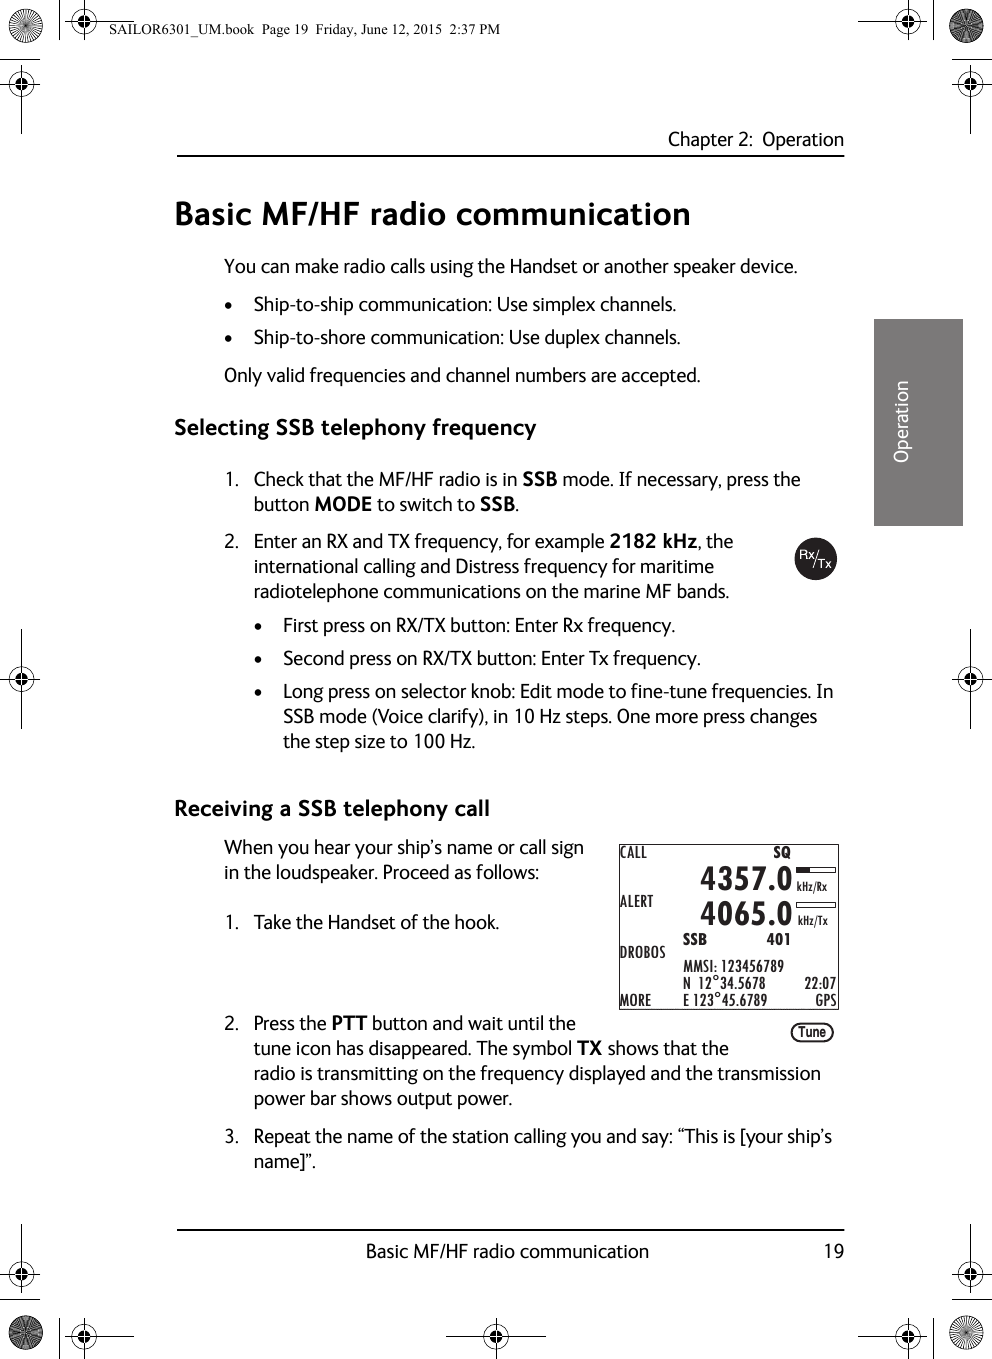 Chapter 2:  OperationBasic MF/HF radio communication 1922222OperationBasic MF/HF radio communicationYou can make radio calls using the Handset or another speaker device.• Ship-to-ship communication: Use simplex channels.• Ship-to-shore communication: Use duplex channels.Only valid frequencies and channel numbers are accepted. Selecting SSB telephony frequency1. Check that the MF/HF radio is in SSB mode. If necessary, press the button MODE to switch to SSB.2. Enter an RX and TX frequency, for example 2182 kHz, the international calling and Distress frequency for maritime radiotelephone communications on the marine MF bands.• First press on RX/TX button: Enter Rx frequency.• Second press on RX/TX button: Enter Tx frequency.• Long press on selector knob: Edit mode to fine-tune frequencies. In SSB mode (Voice clarify), in 10 Hz steps. One more press changes the step size to 100 Hz.Receiving a SSB telephony callWhen you hear your ship’s name or call sign in the loudspeaker. Proceed as follows:1. Take the Handset of the hook.2. Press the PTT button and wait until the tune icon has disappeared. The symbol TX shows that the radio is transmitting on the frequency displayed and the transmission power bar shows output power.3. Repeat the name of the station calling you and say: “This is [your ship’s name]”.CALLALERTDROBOSMOREMMSI: 123456789N  12°34.5678E 123°45.6789 GPS4357.04065.0SSB              401SQkHz/TxkHz/Rx22:07TuneSAILOR6301_UM.book  Page 19  Friday, June 12, 2015  2:37 PM